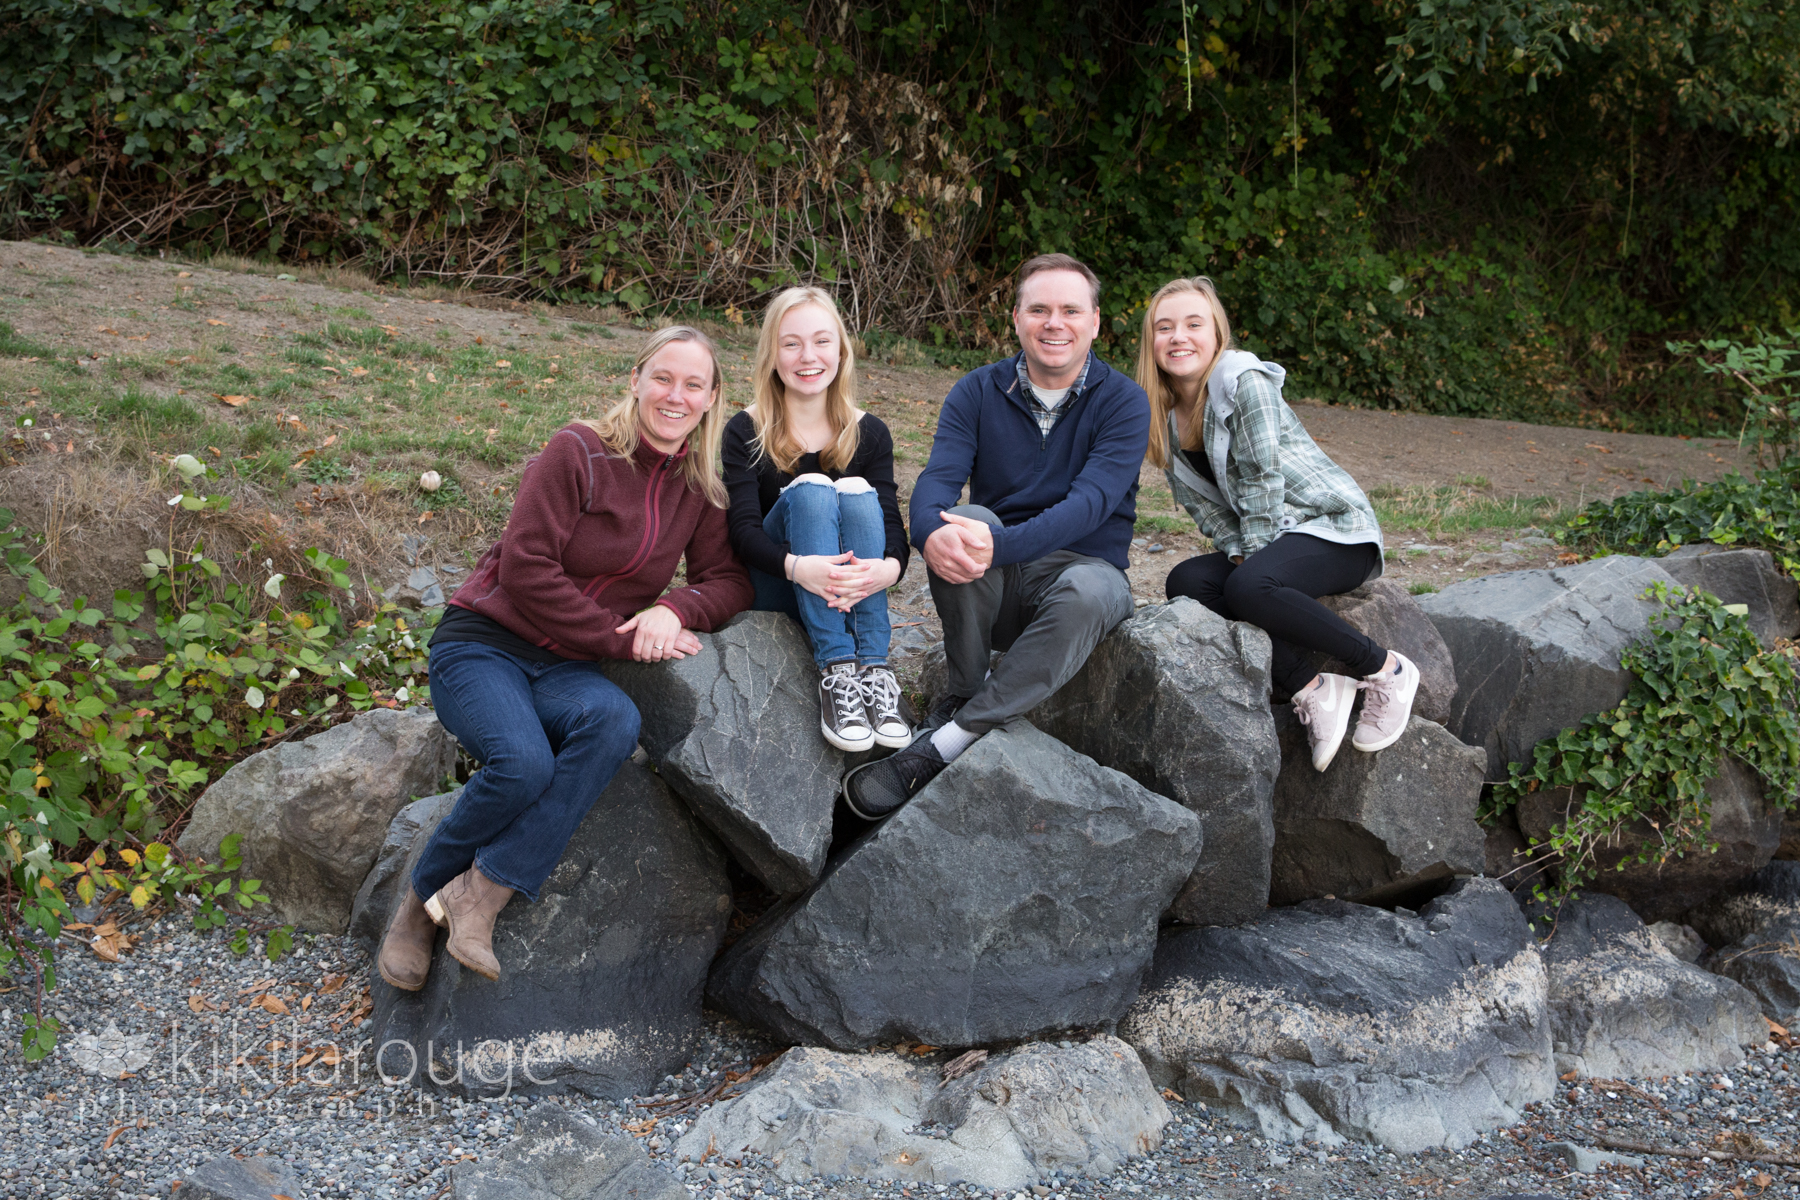 Family portrait sitting on rocks at water's edge